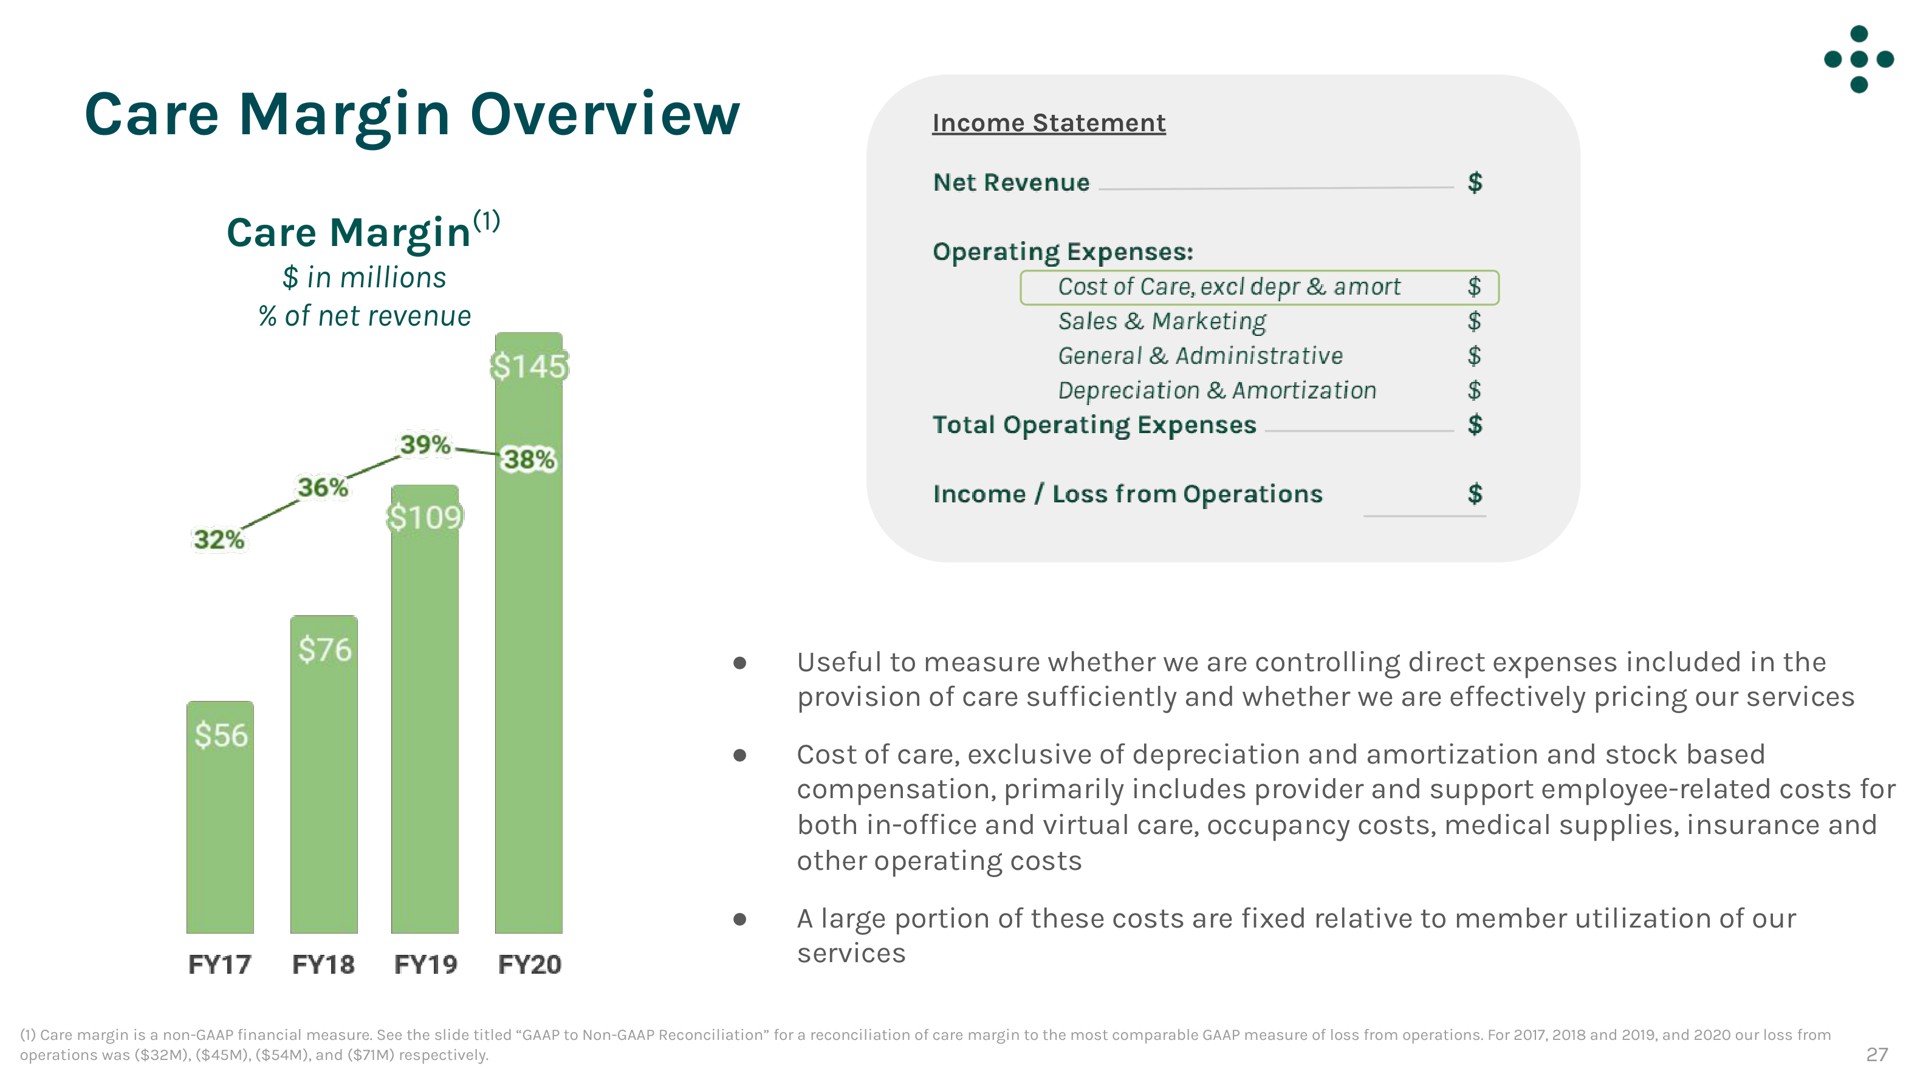 care margin overview income statement | One Medical